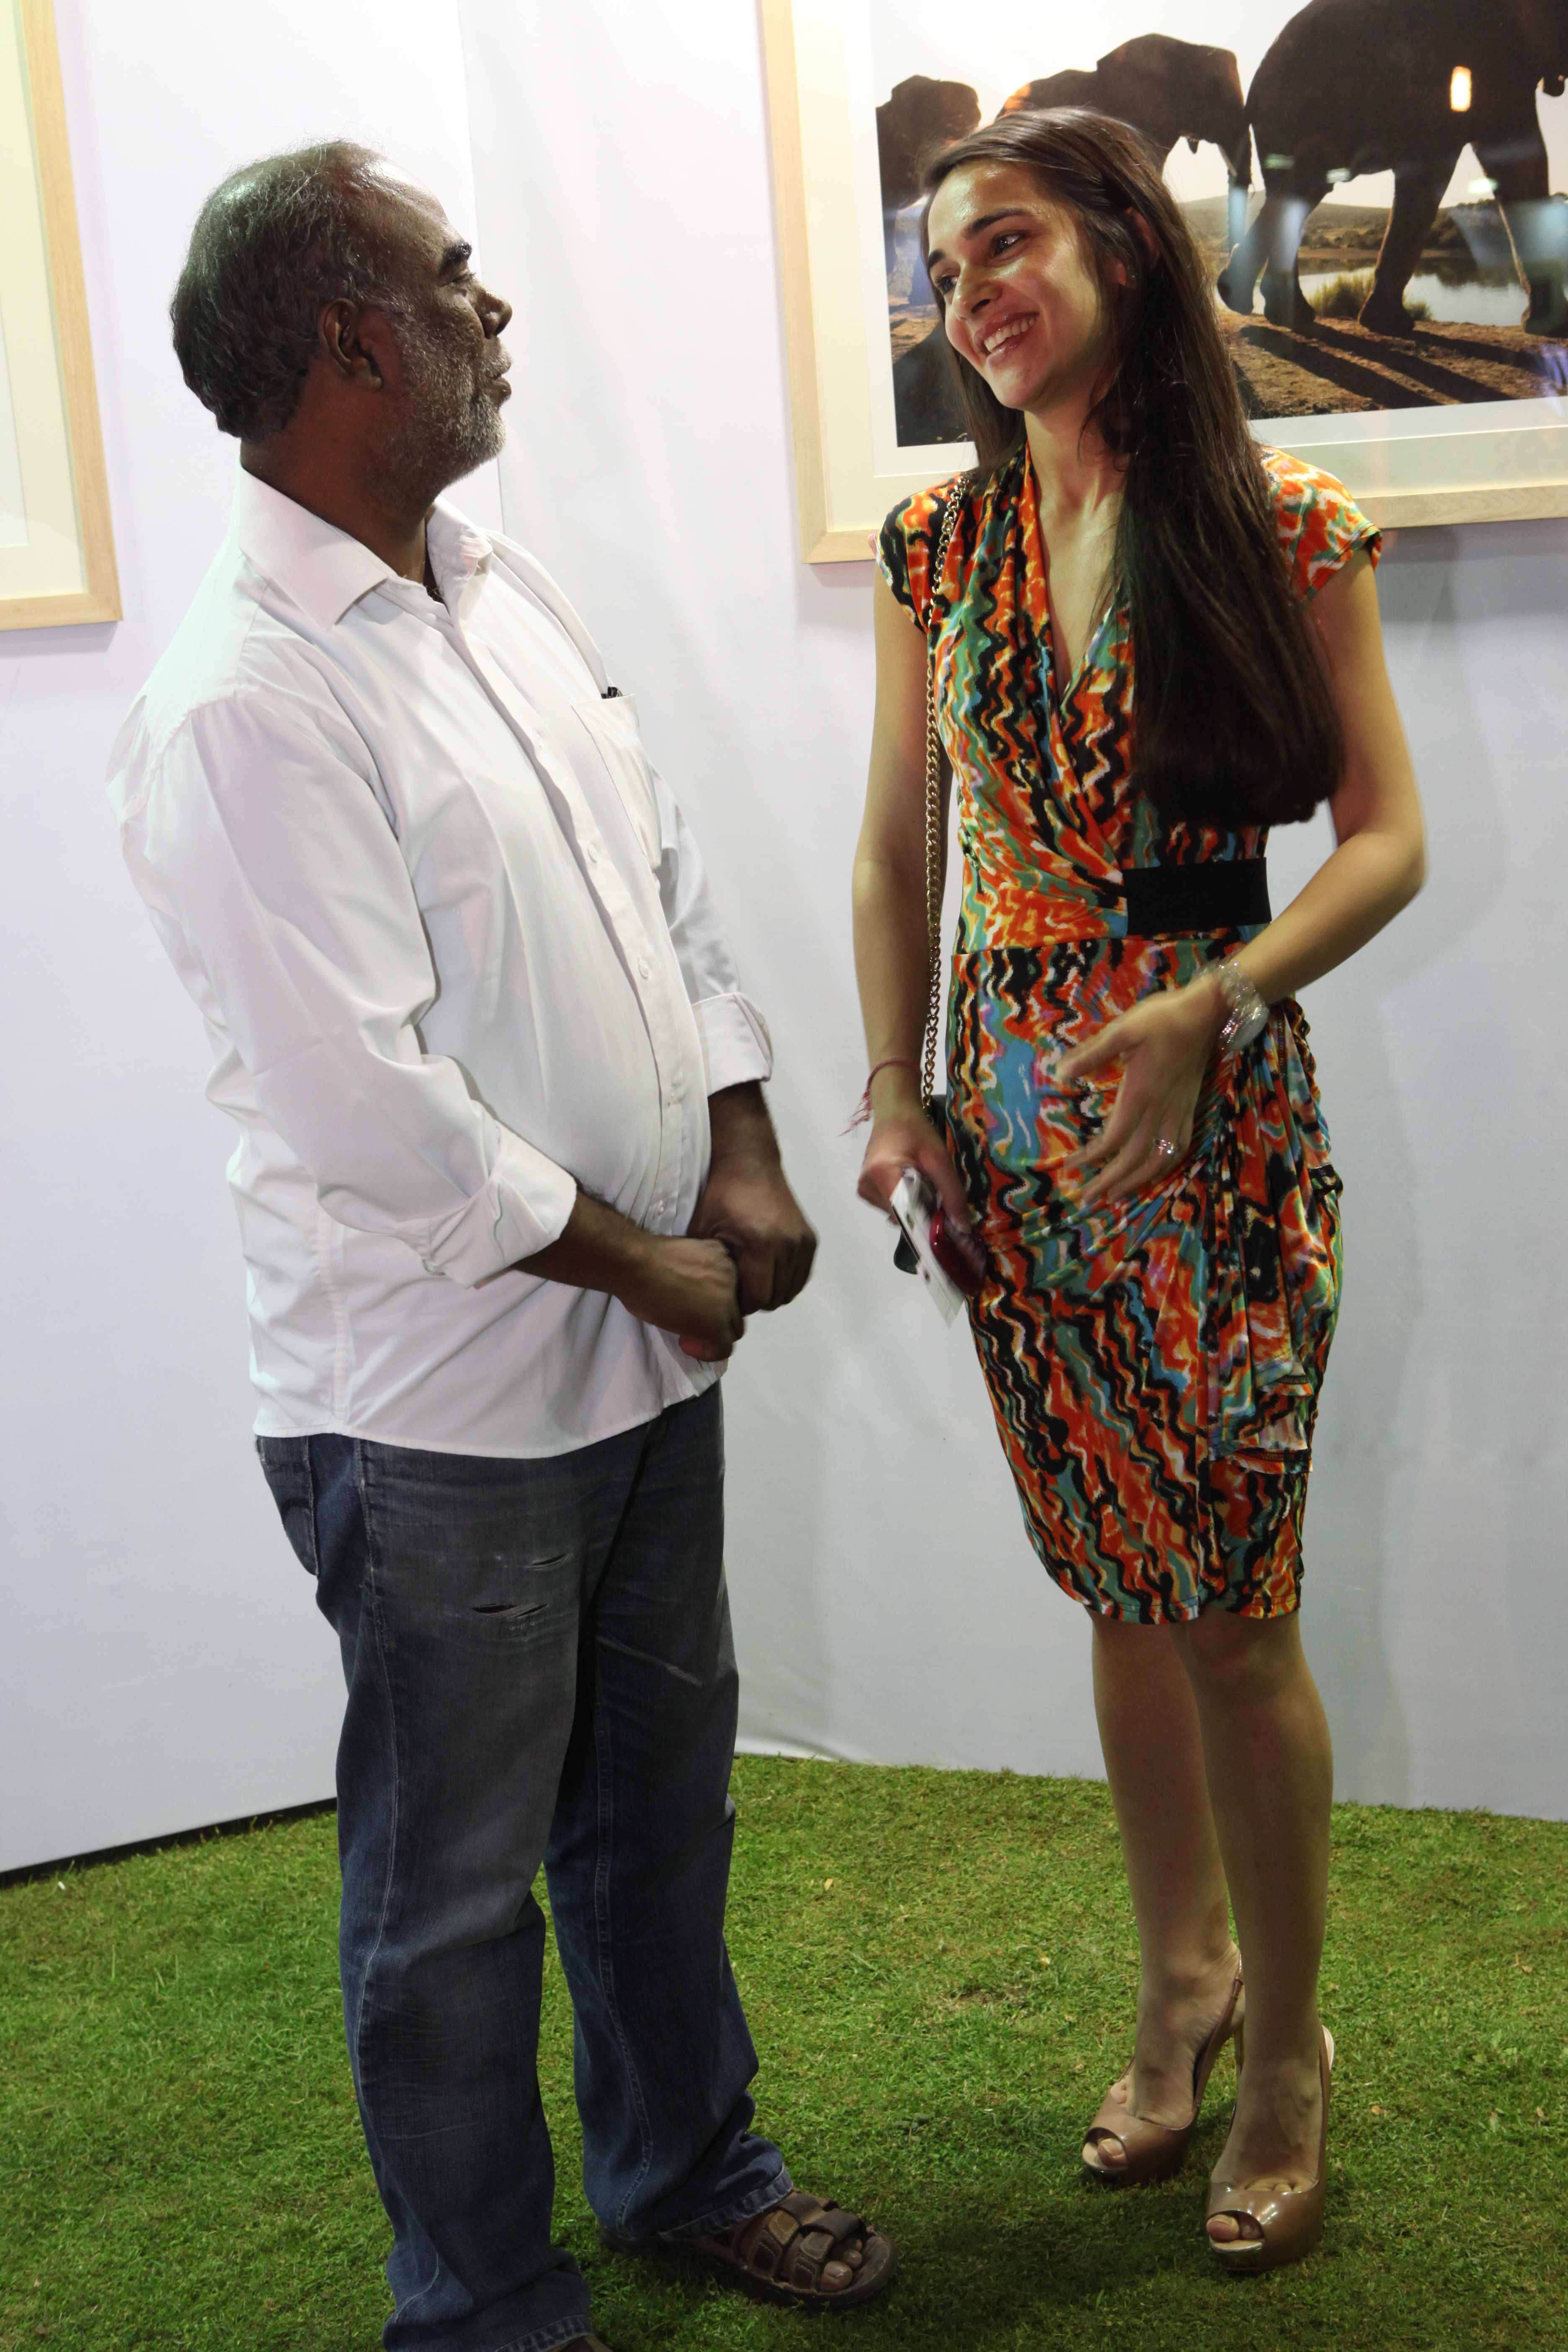 Bollywood Actor Tara Sharma with award winning photographer Sudharak Olwe at his photography exhibition in association with South African Tourism